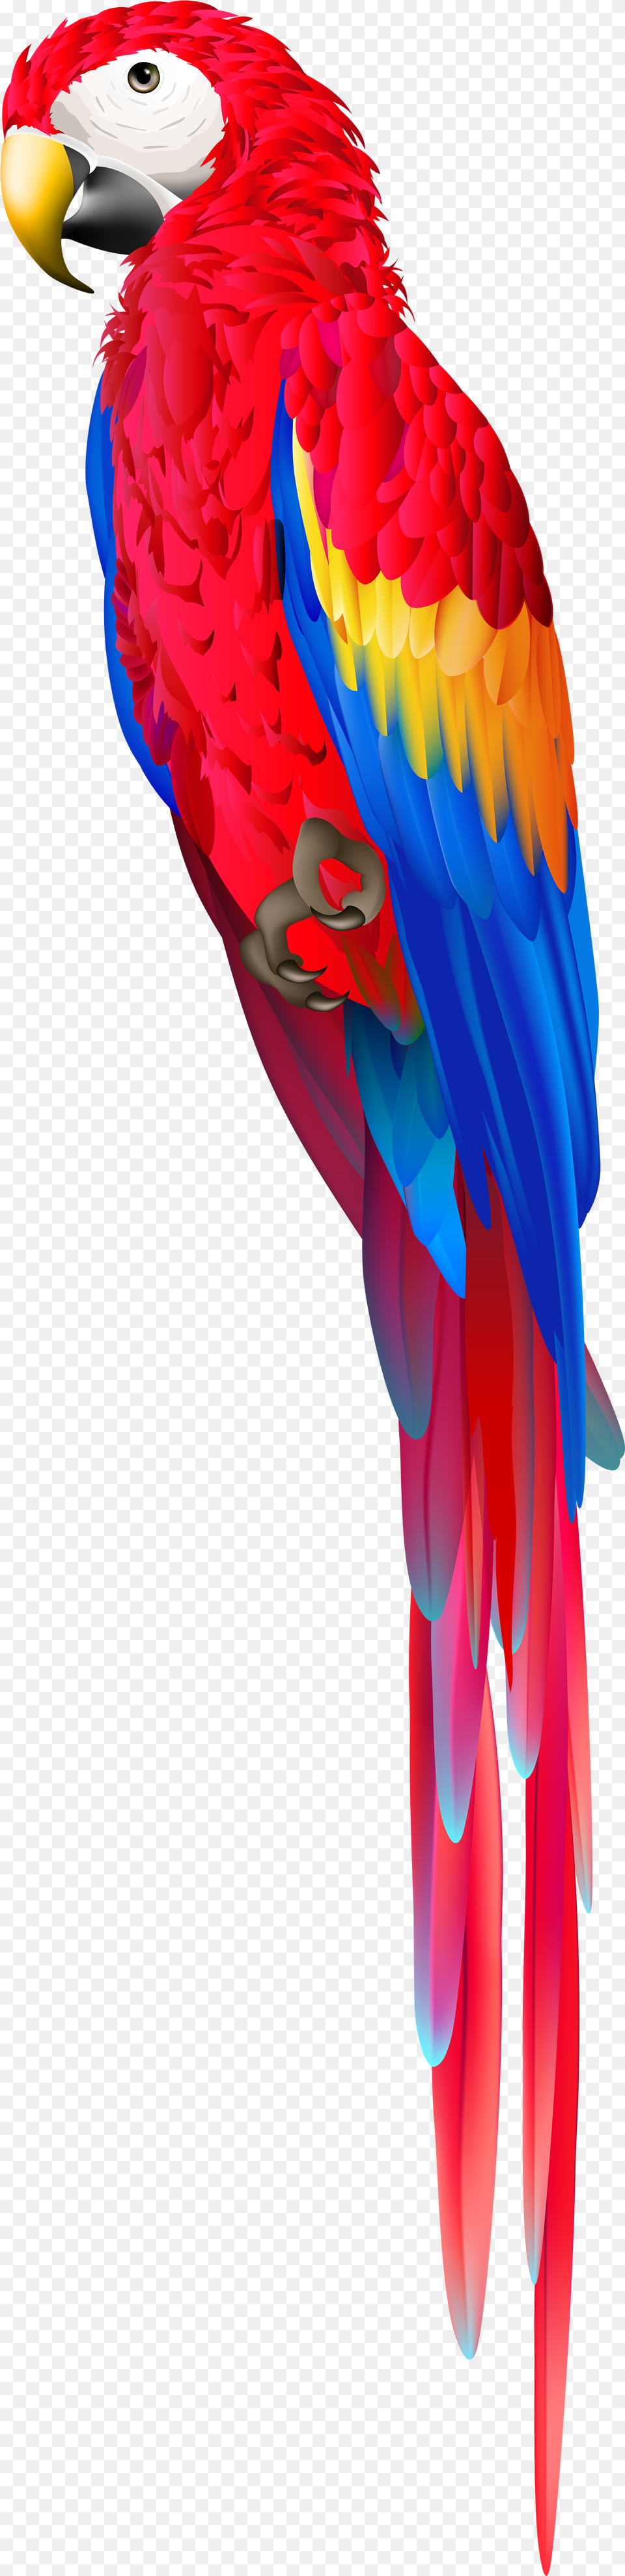 Red Parrot Clipart Transparent Red Parrot, Animal, Bird, Macaw Png Image